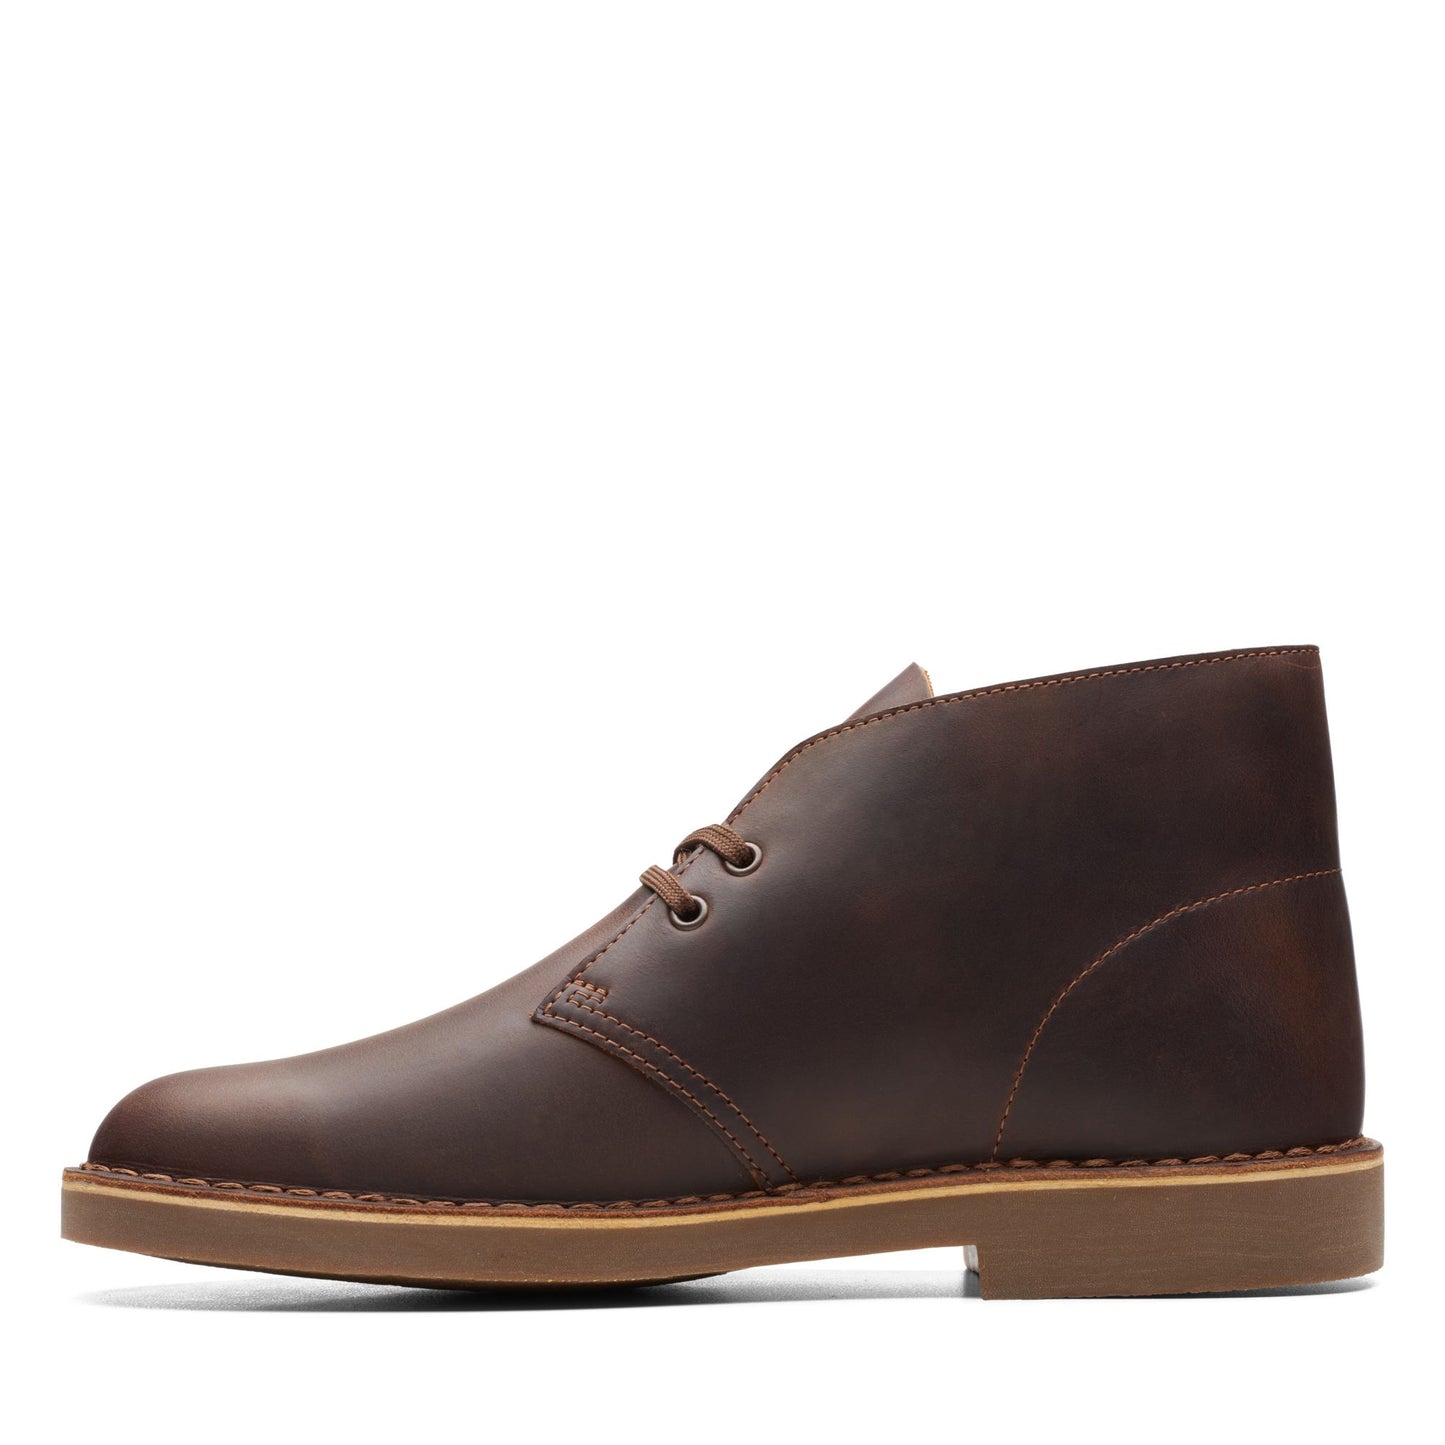 Clarks Desert Boot Beeswax Leather